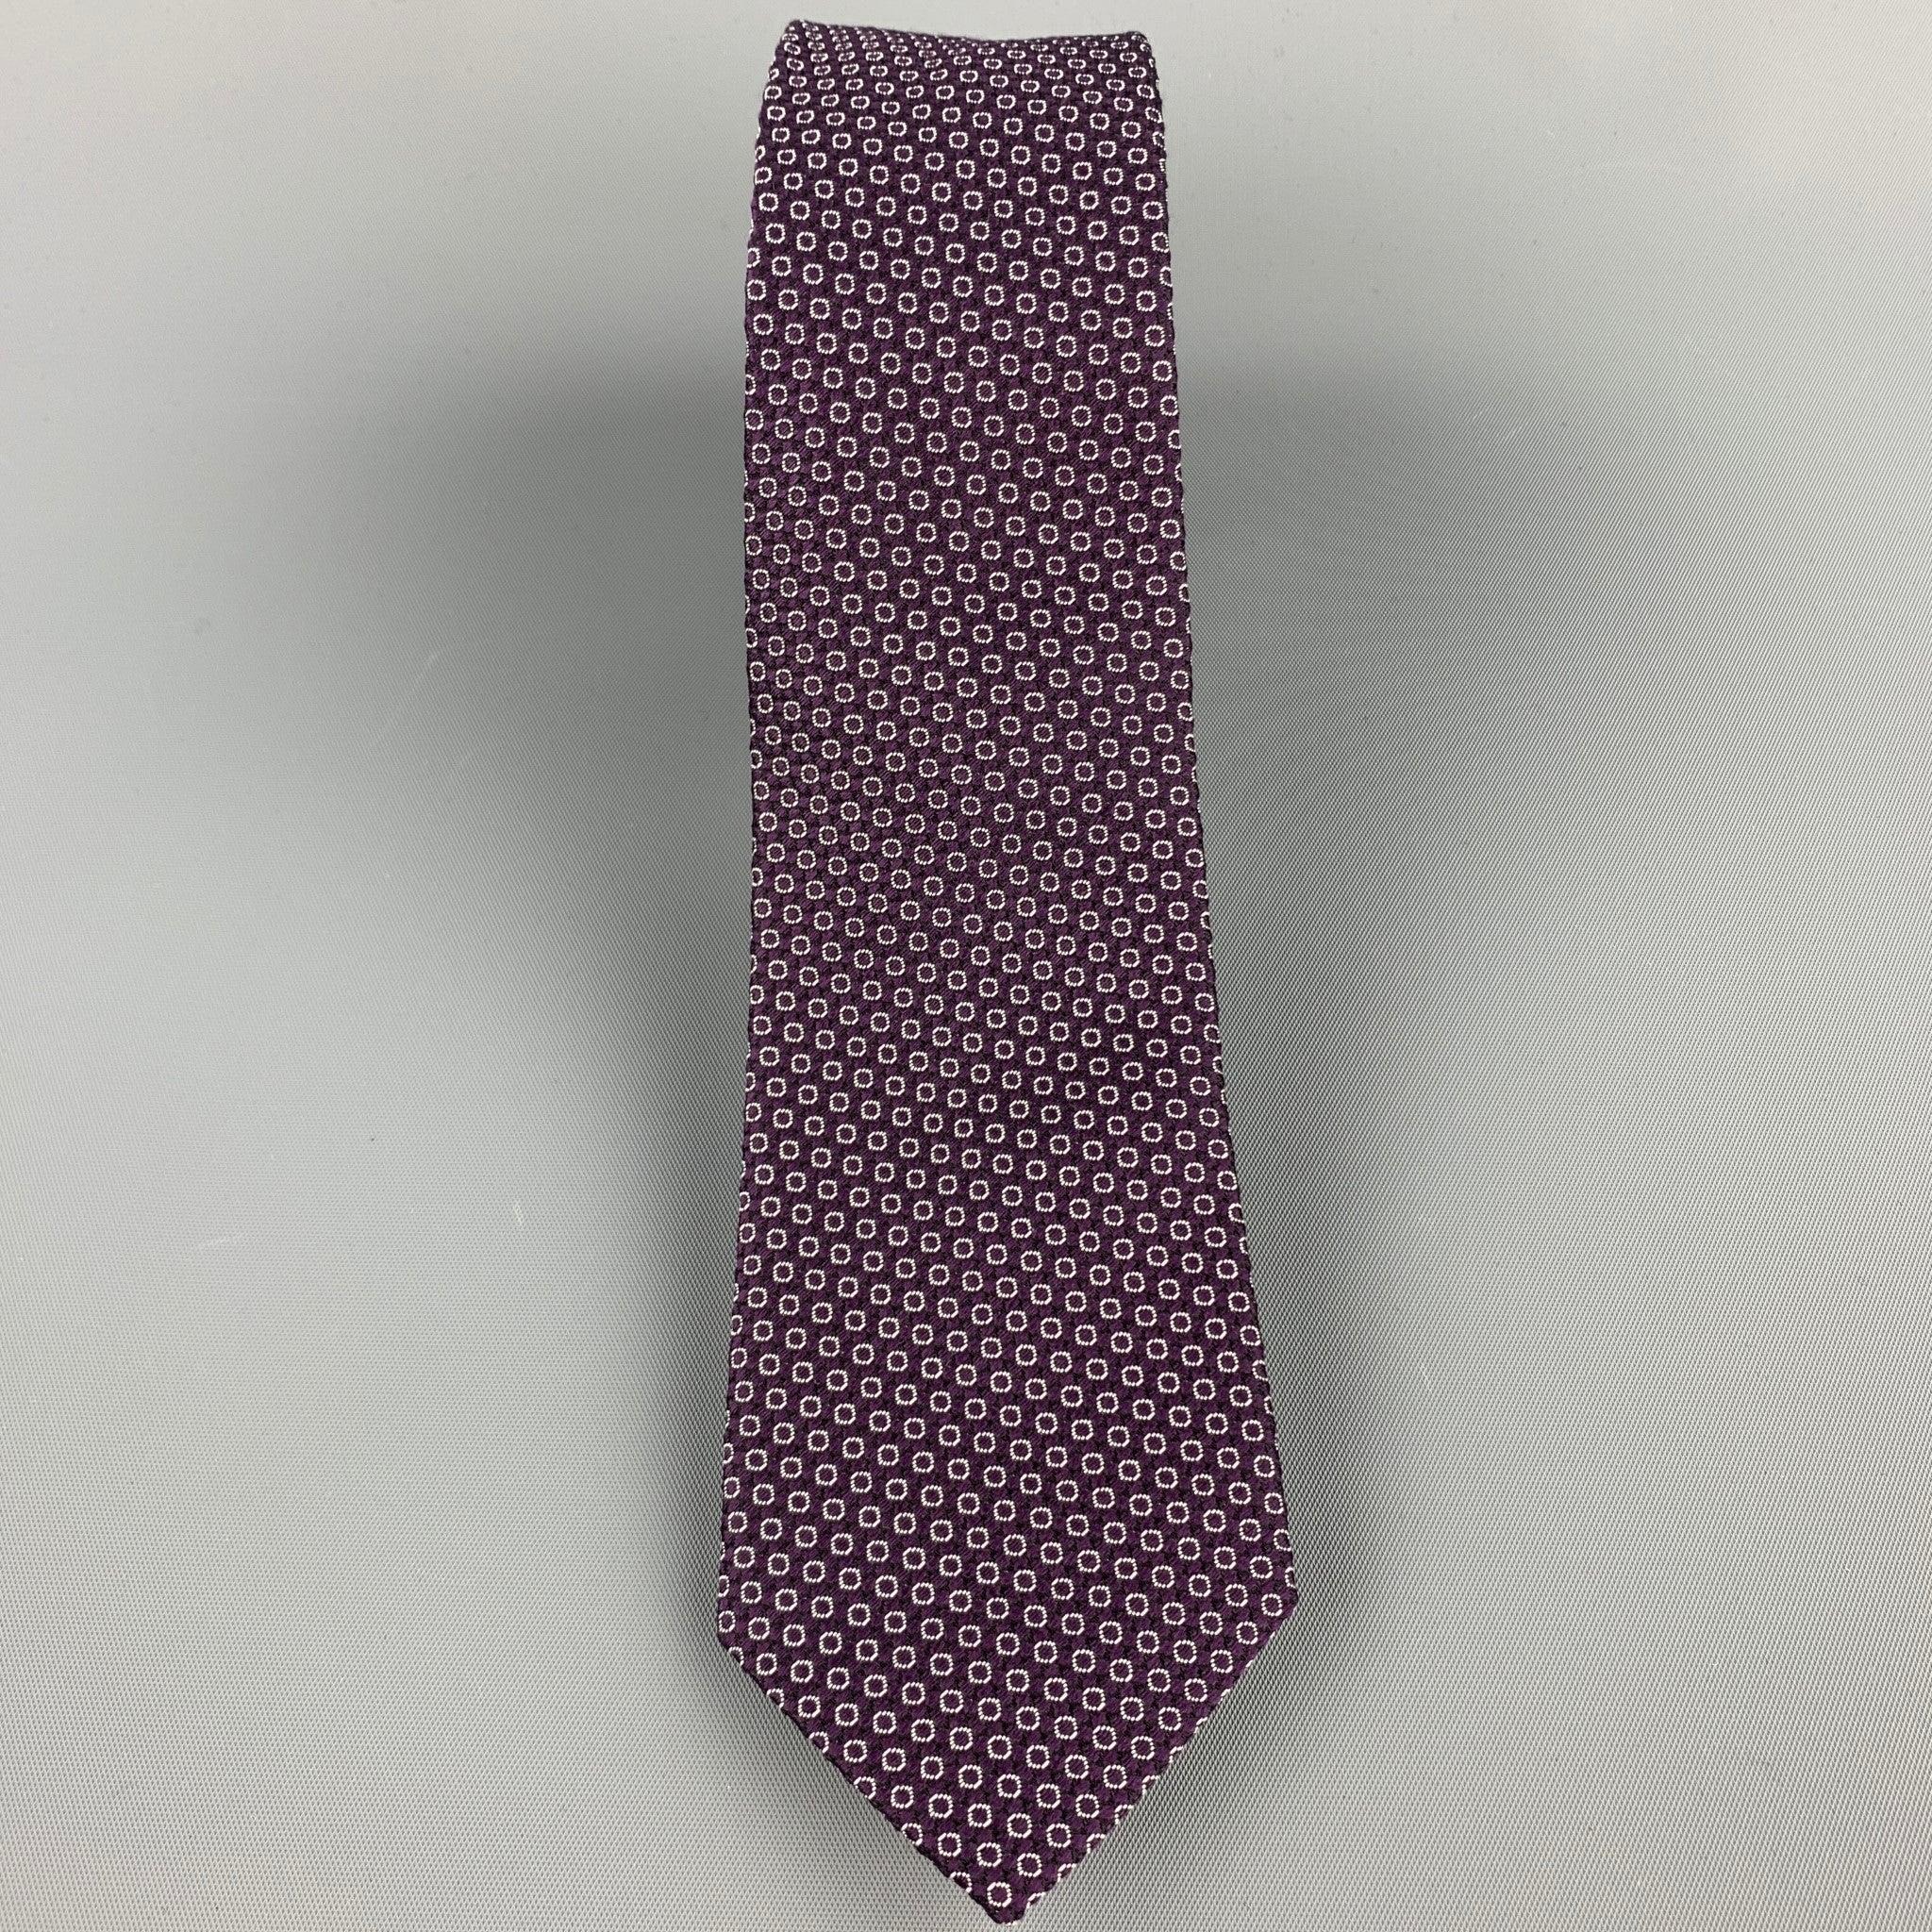 PAUL SMITH neck tie comes in a purple dot print with floral lining. Made in Italy.Very Good Pre-Owen Condition.Width: 2.5 inches 
  
  
 
Reference: 106708
Category: Tie
More Details
    
Brand:  PAUL SMITH
Color:  Purple
Pattern:  Dots
Fabric: 